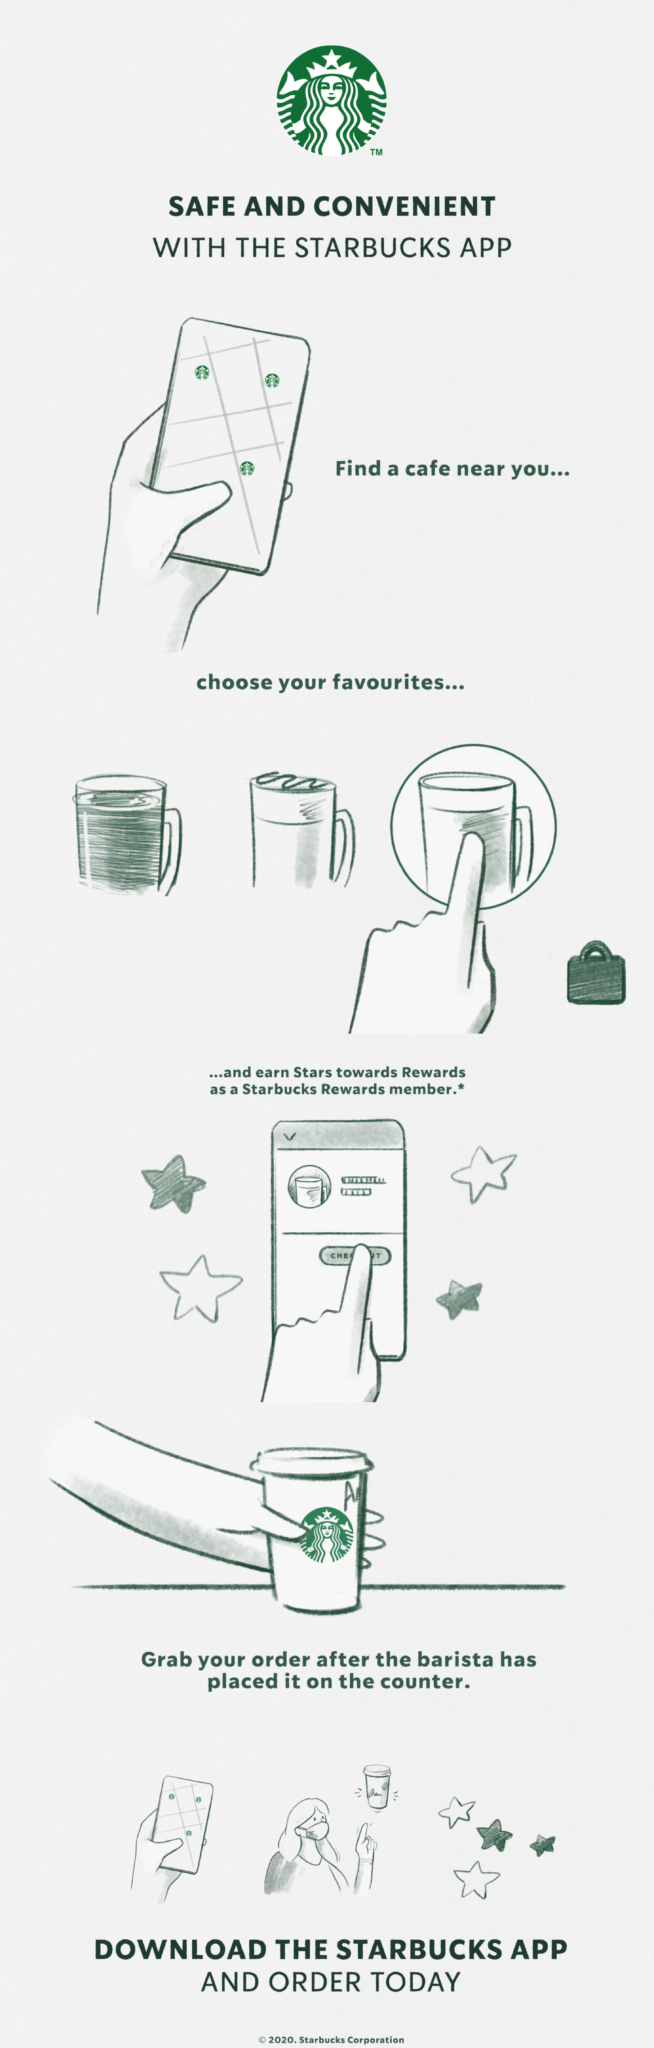 The starbucks app has a simple design and good user experience